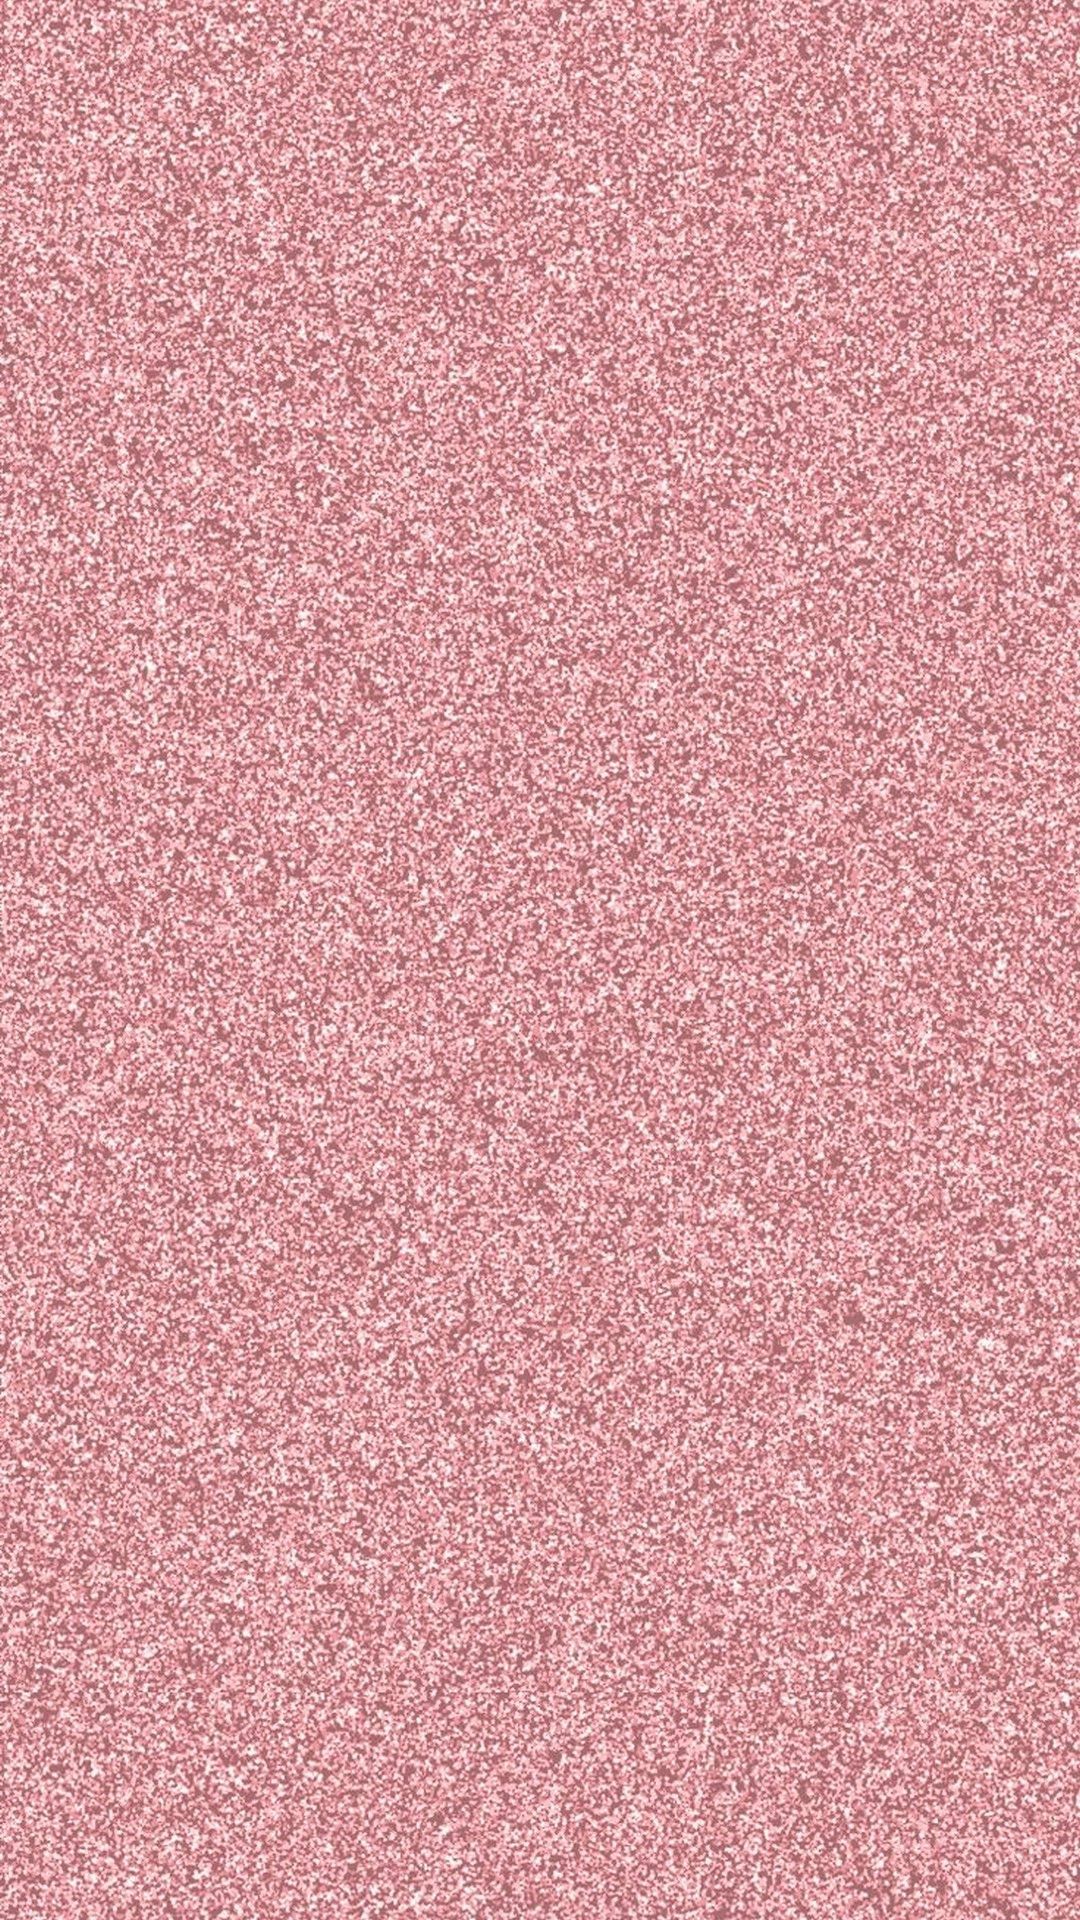 Glitter Wallpaper Image For iPhone Wallpaper on Hupages.com, if you like it dont forget save it or re. Pink glitter wallpaper, Pink wallpaper, Glitter wallpaper